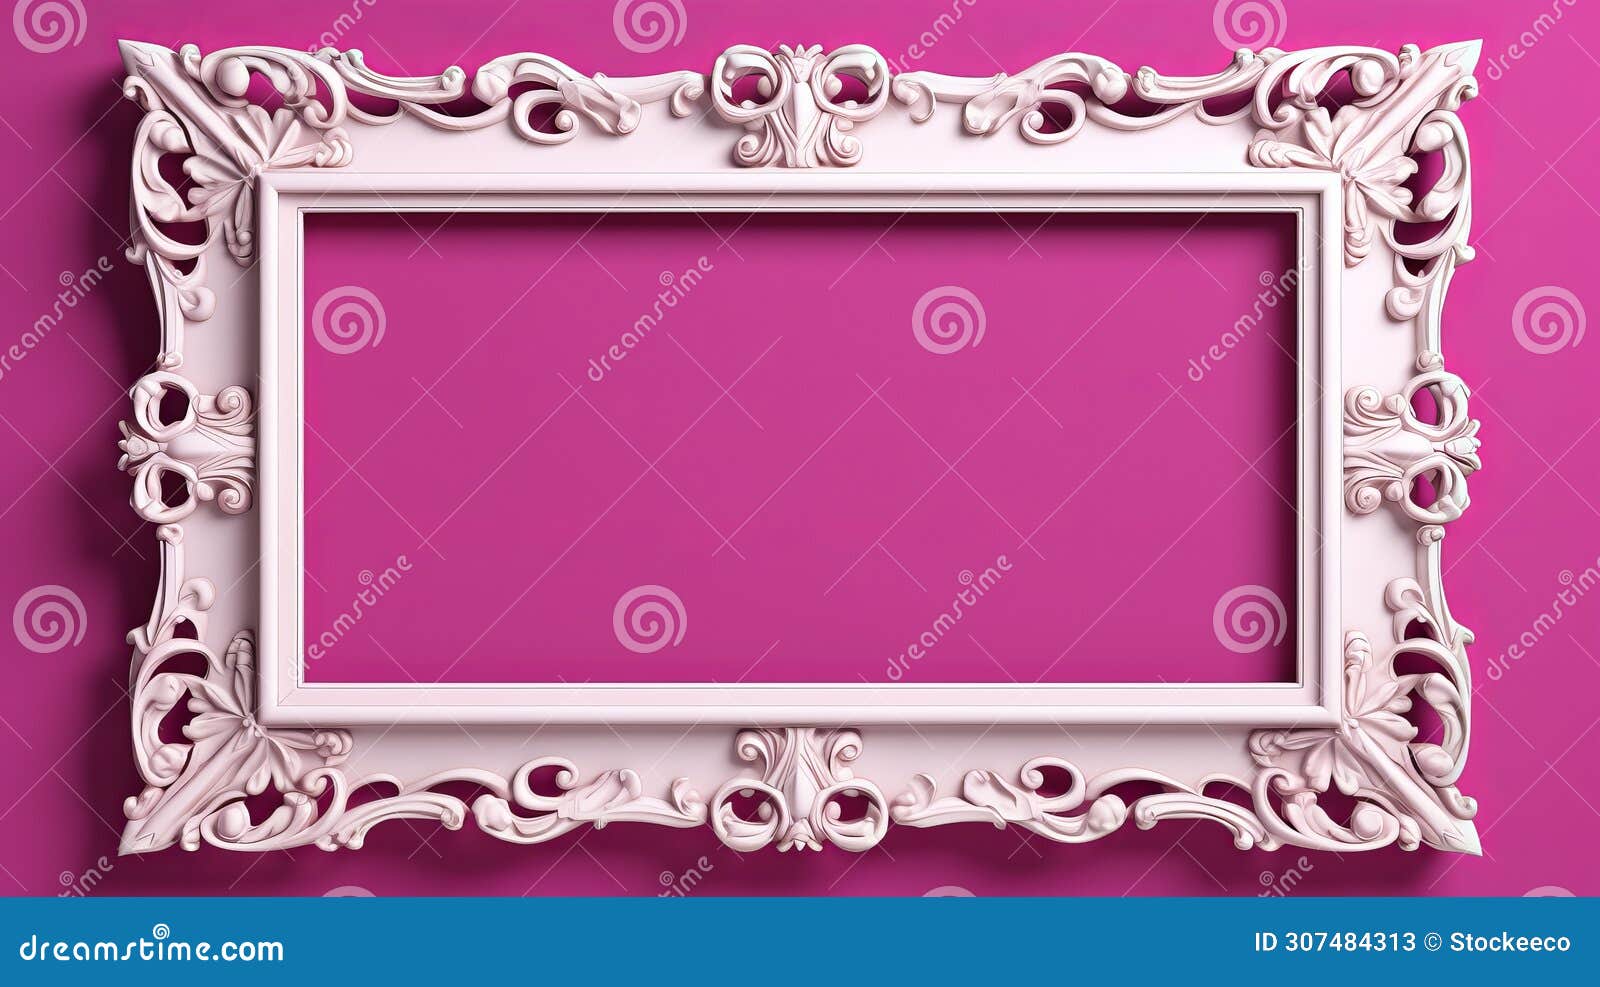 ornate frame on pink background: 3d photo with 8k resolution